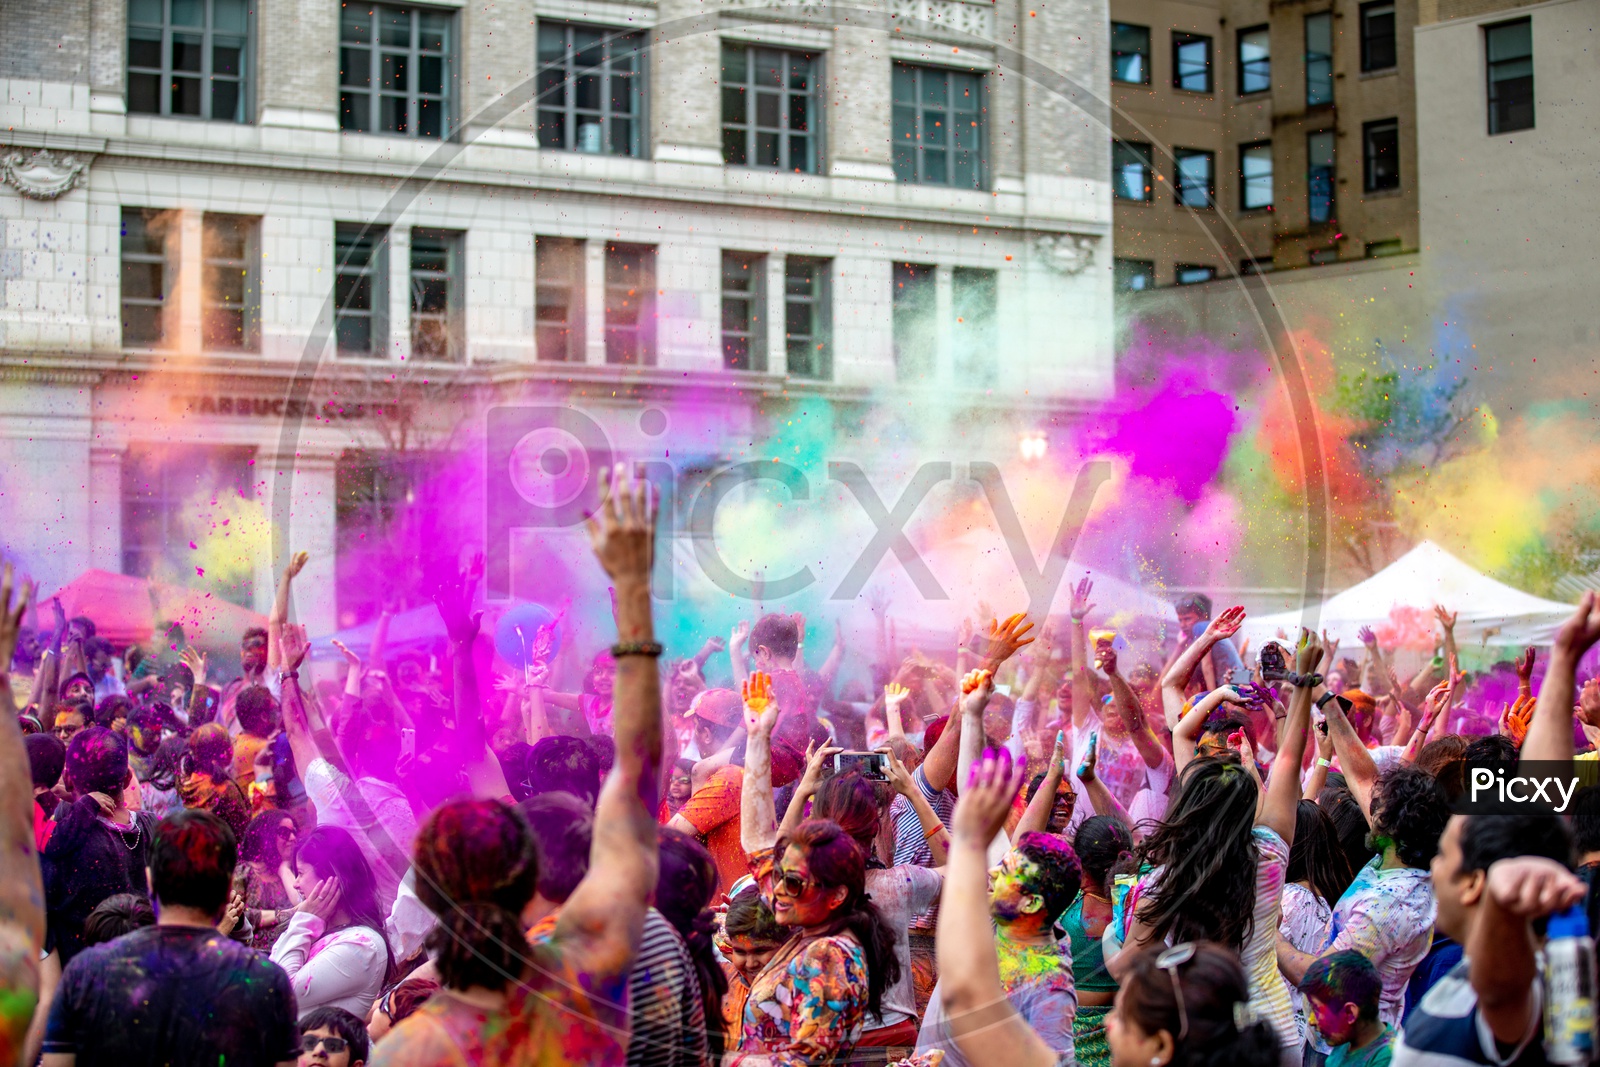 Holi Celebrations - Indian Festival - Colors/Colorful in Jersey City, USA